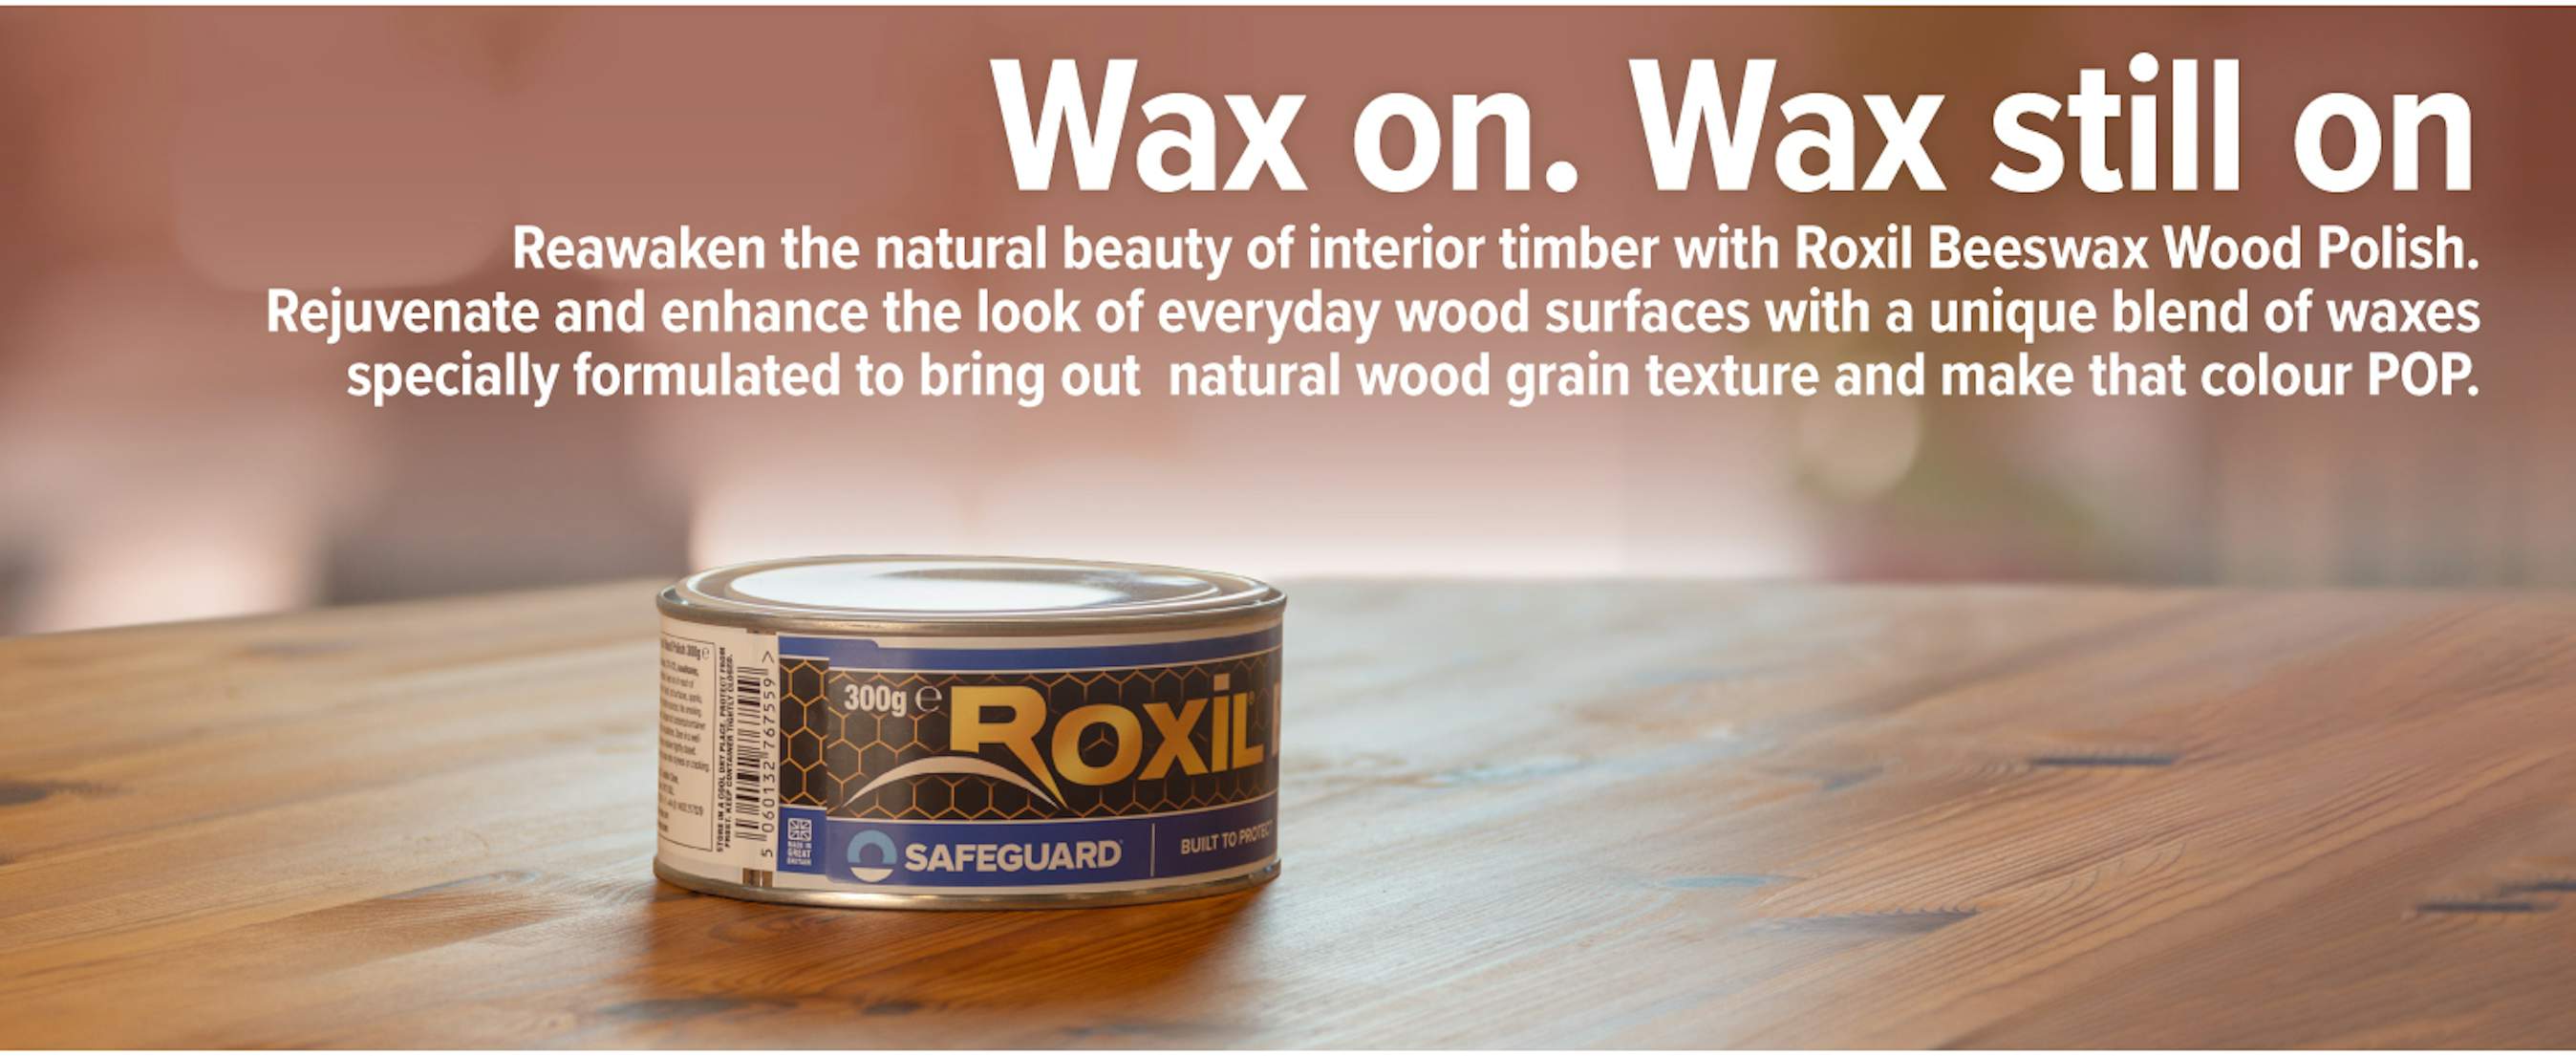 Out Now: Roxil Beeswax Wood Polish